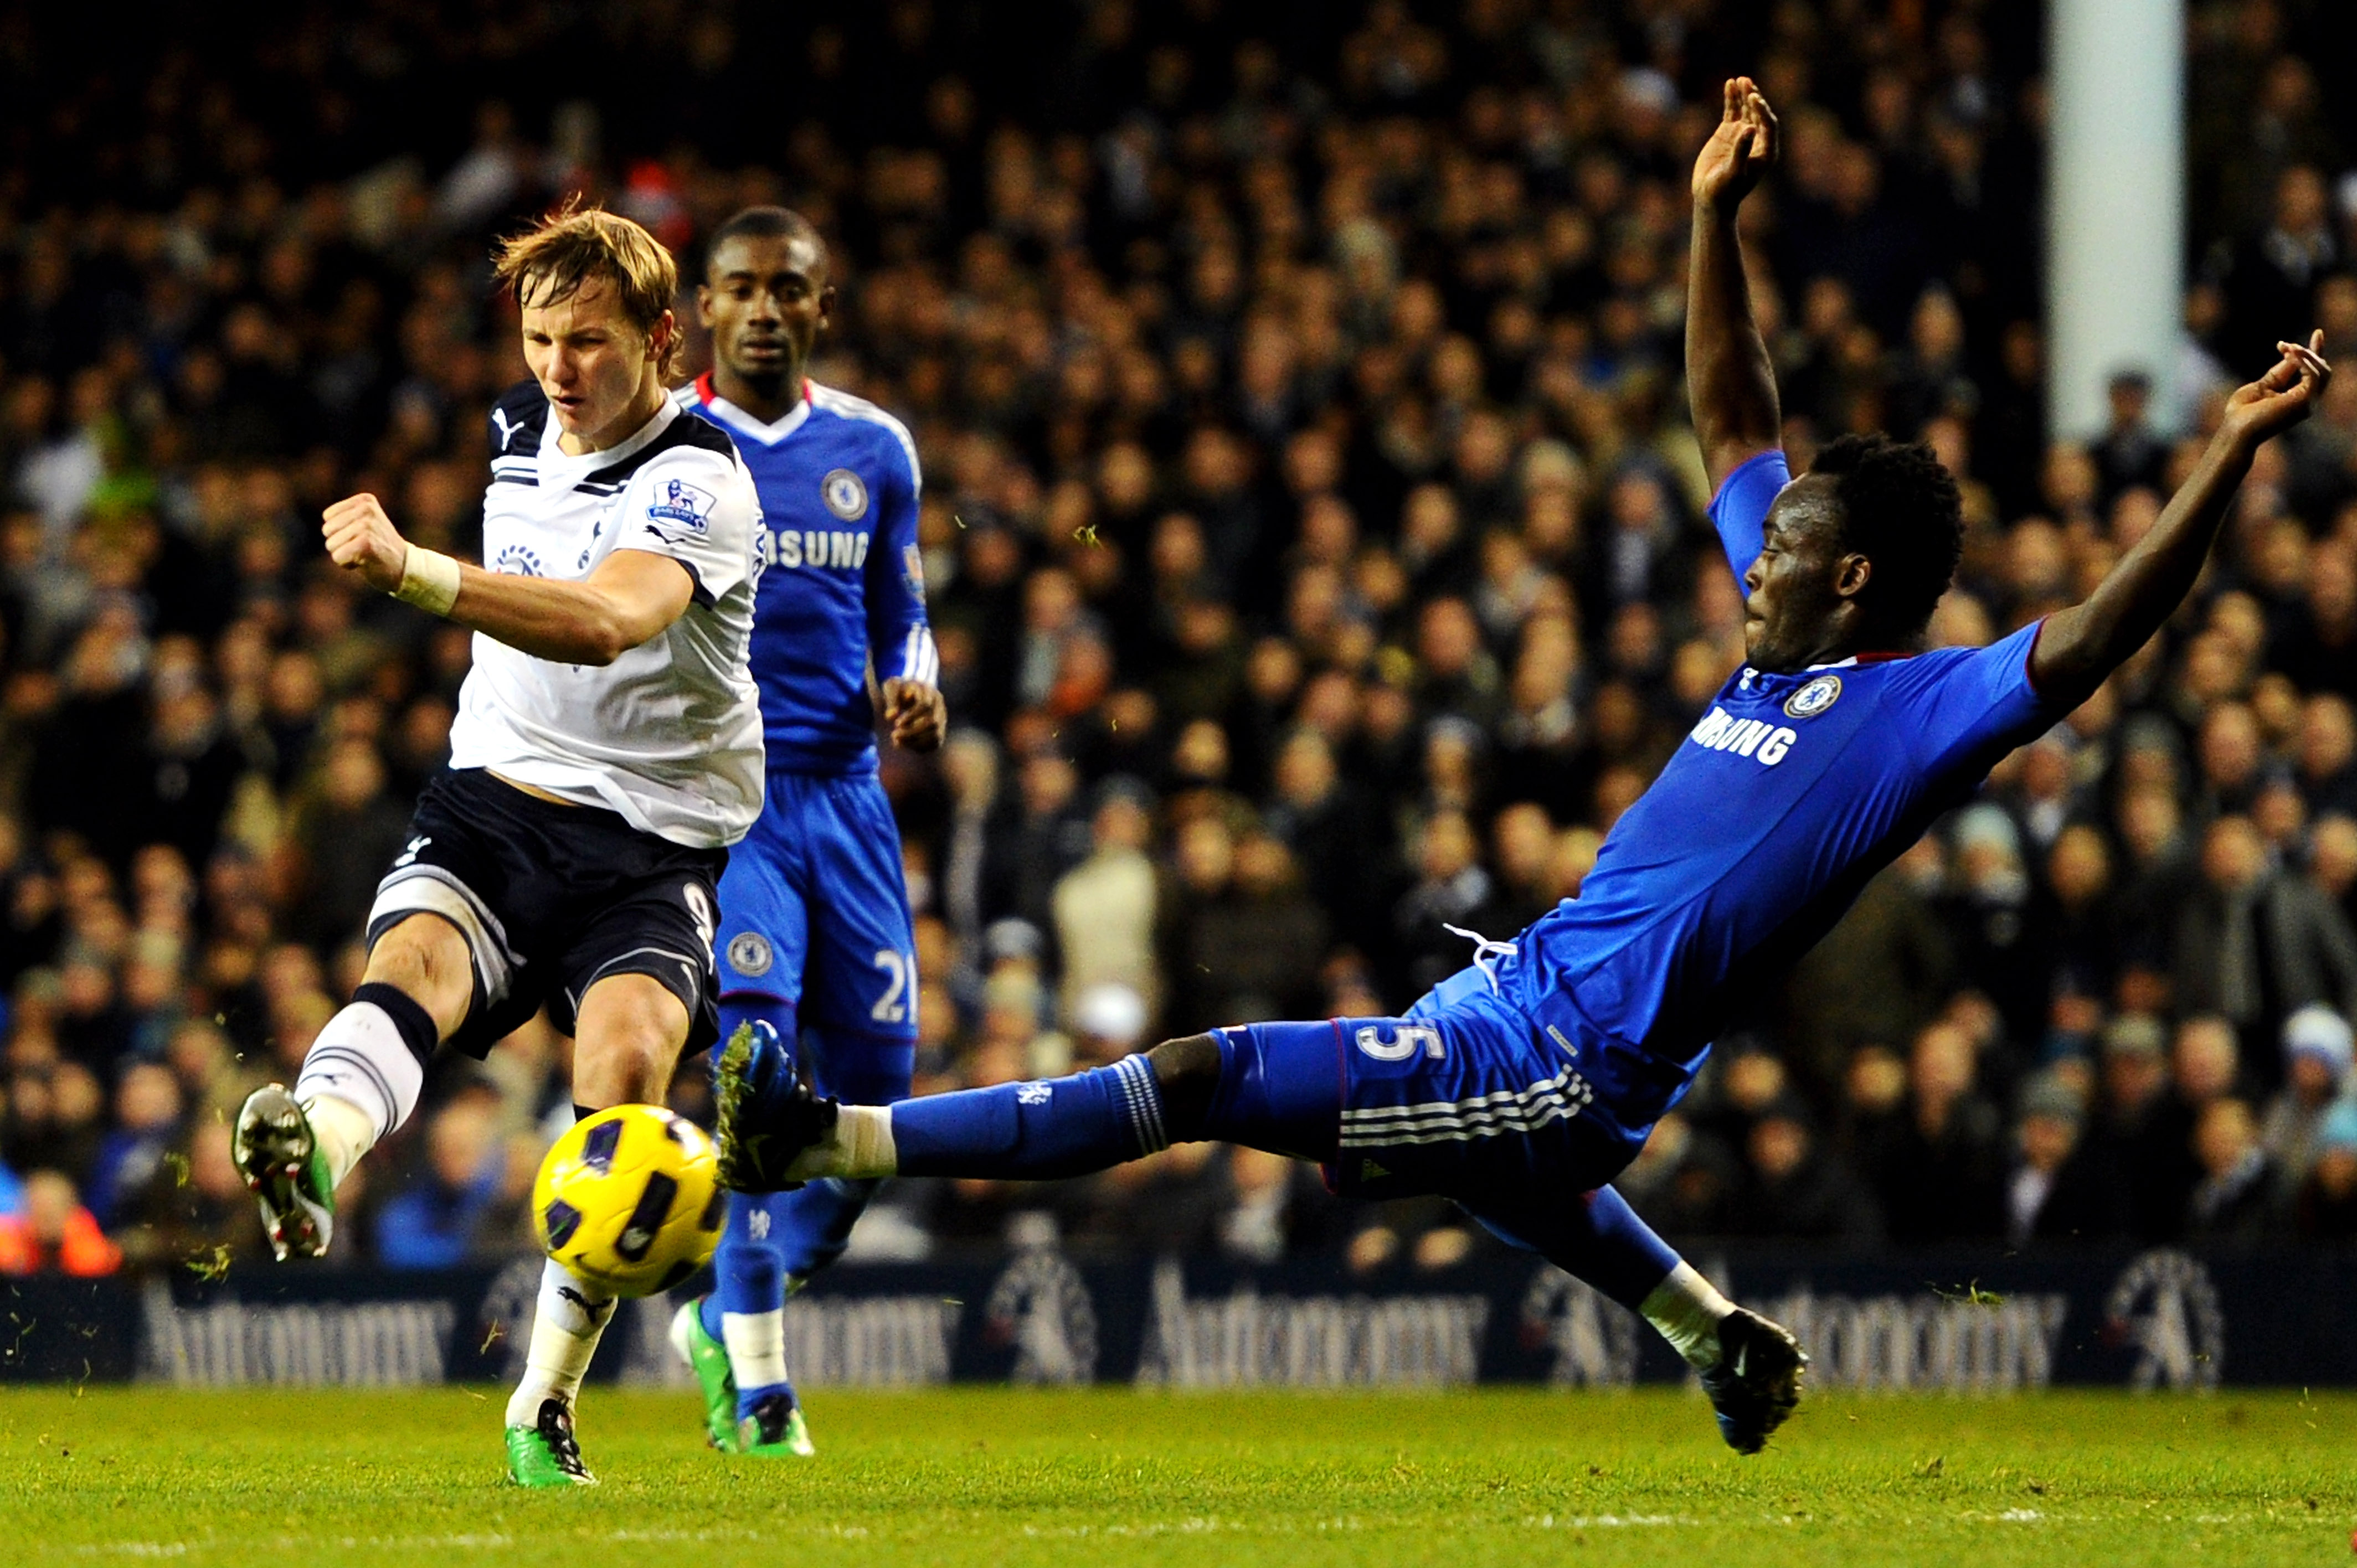 LONDON, ENGLAND - DECEMBER 12: Roman Pavlyuchenko of Spurs has his shot on goal blocked by Michael Essien of Chelsea during the Barclays Premier League match between Tottenham Hotspur and Chelsea at White Hart Lane on December 12, 2010 in London, England.